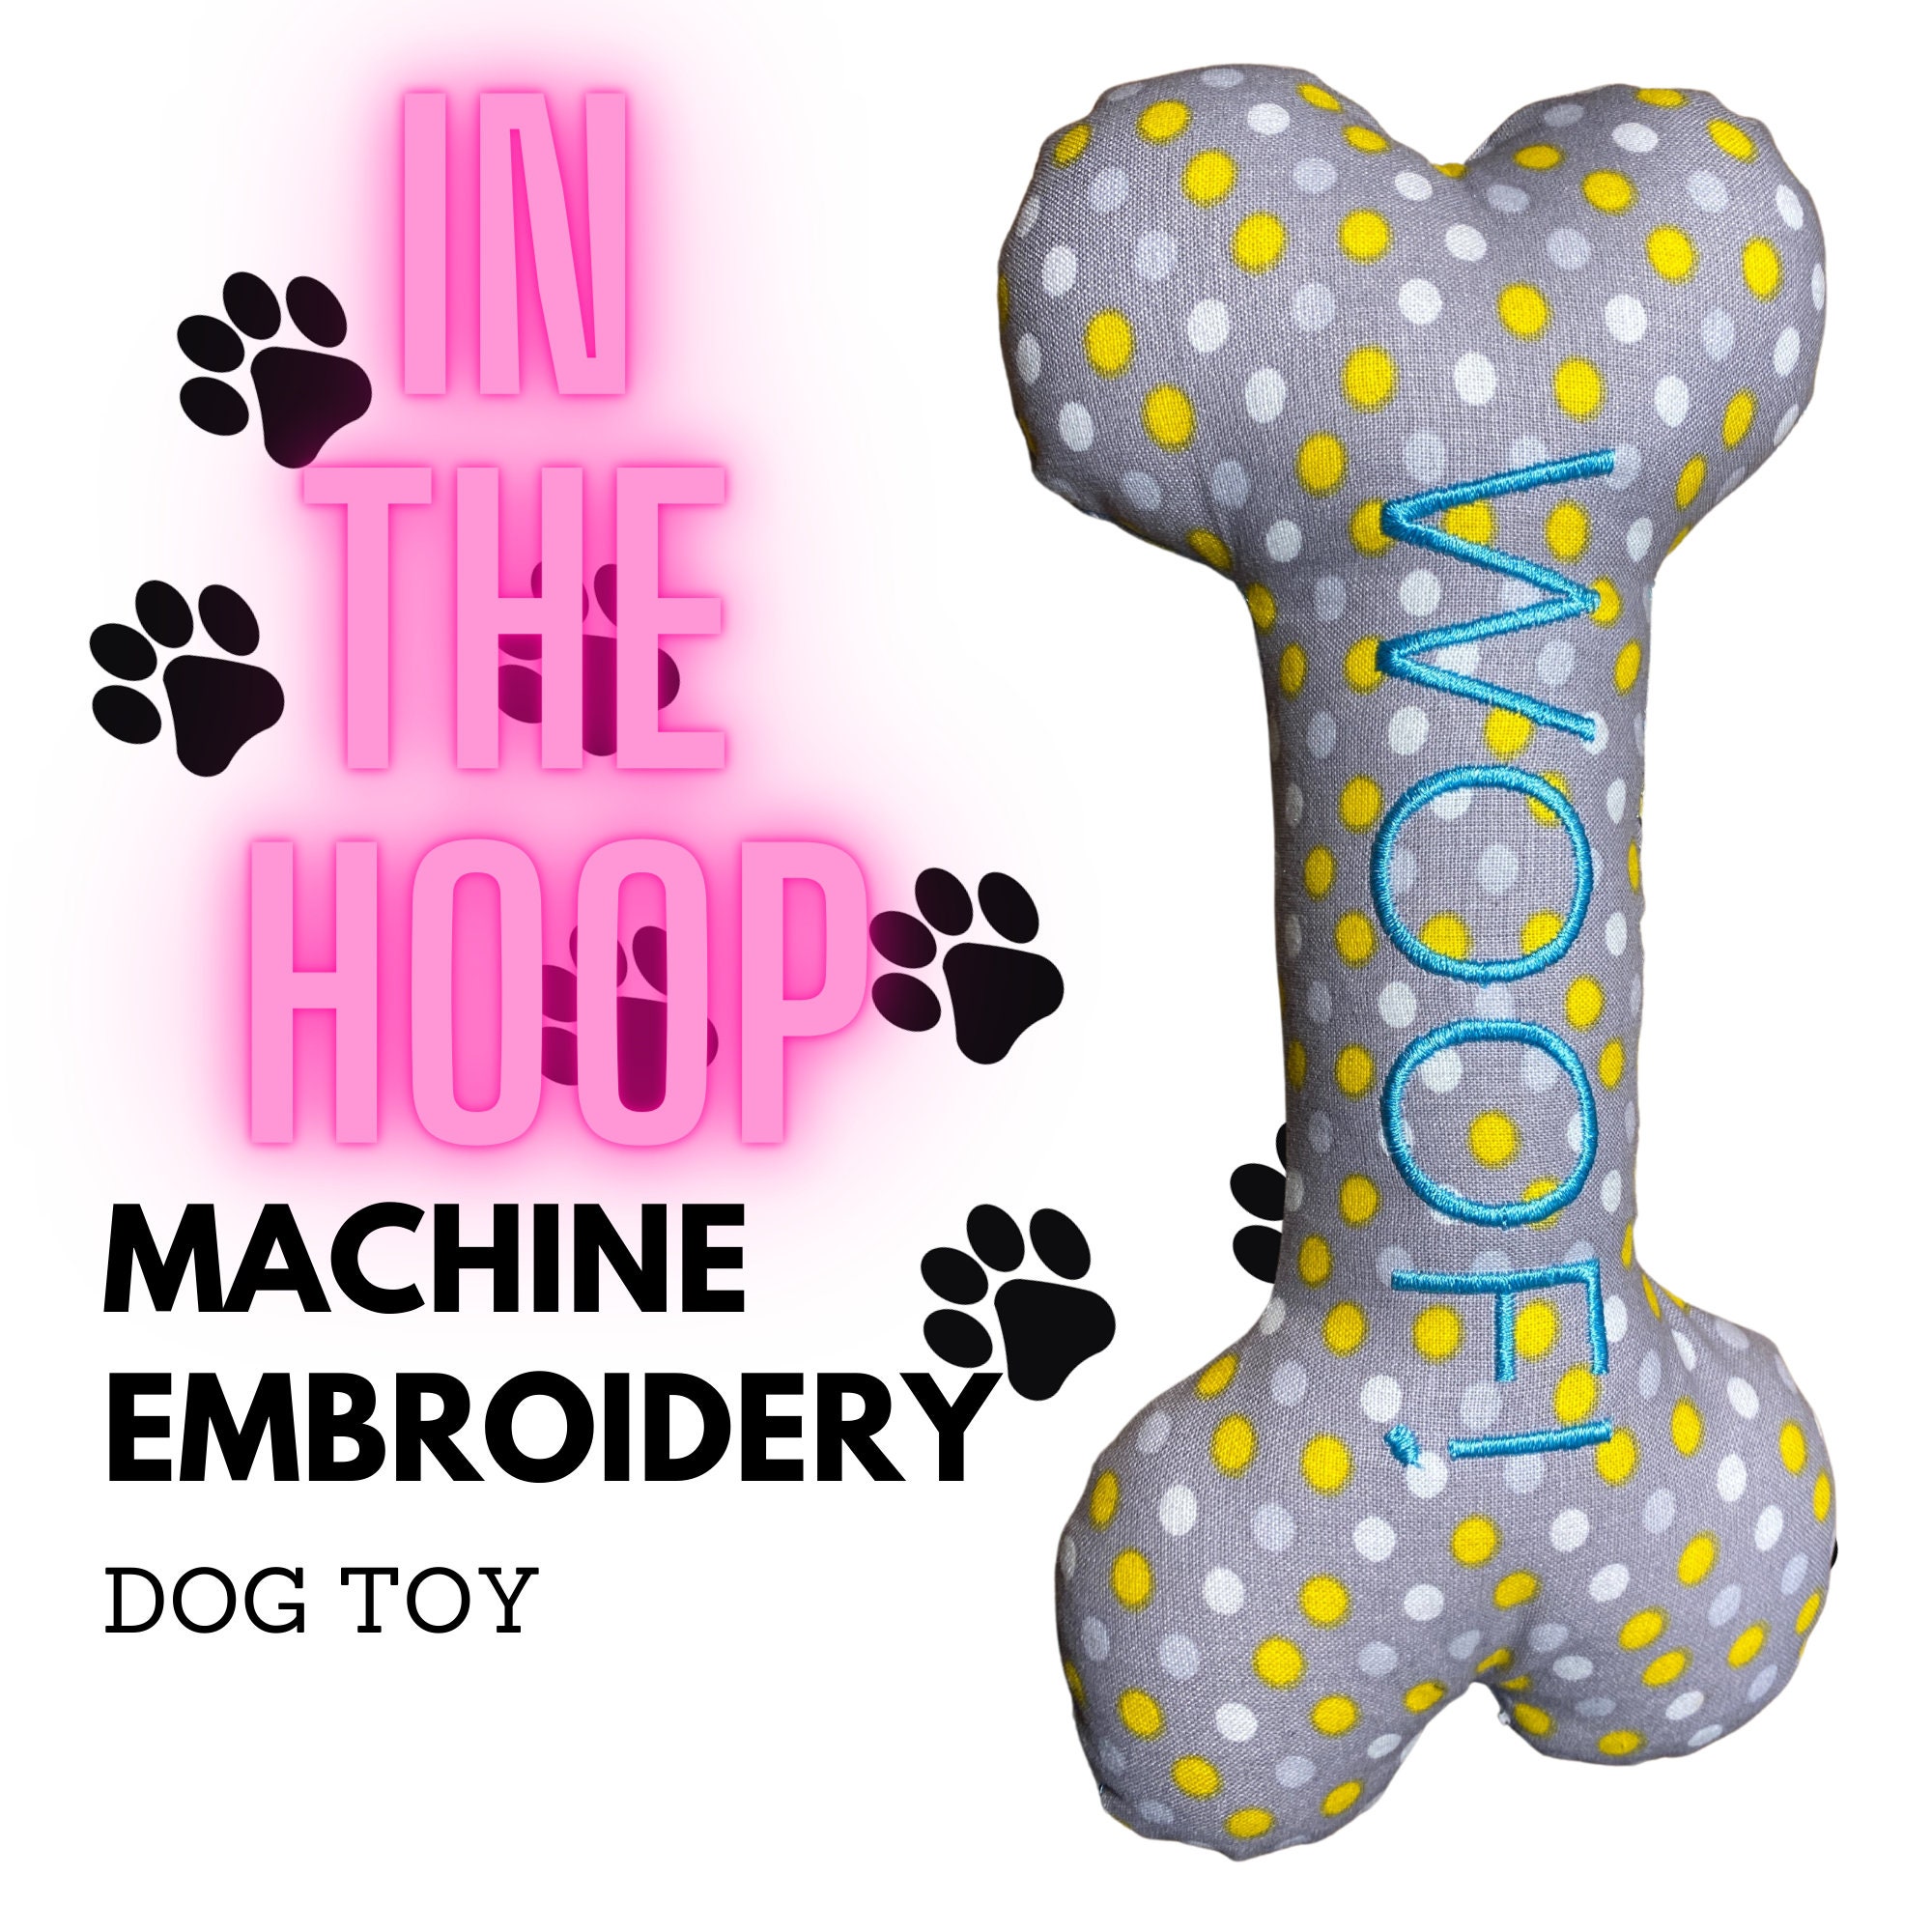 In the hoop Tiger Scarf for use with an embroidery machine – Snuggle Puppy  Applique